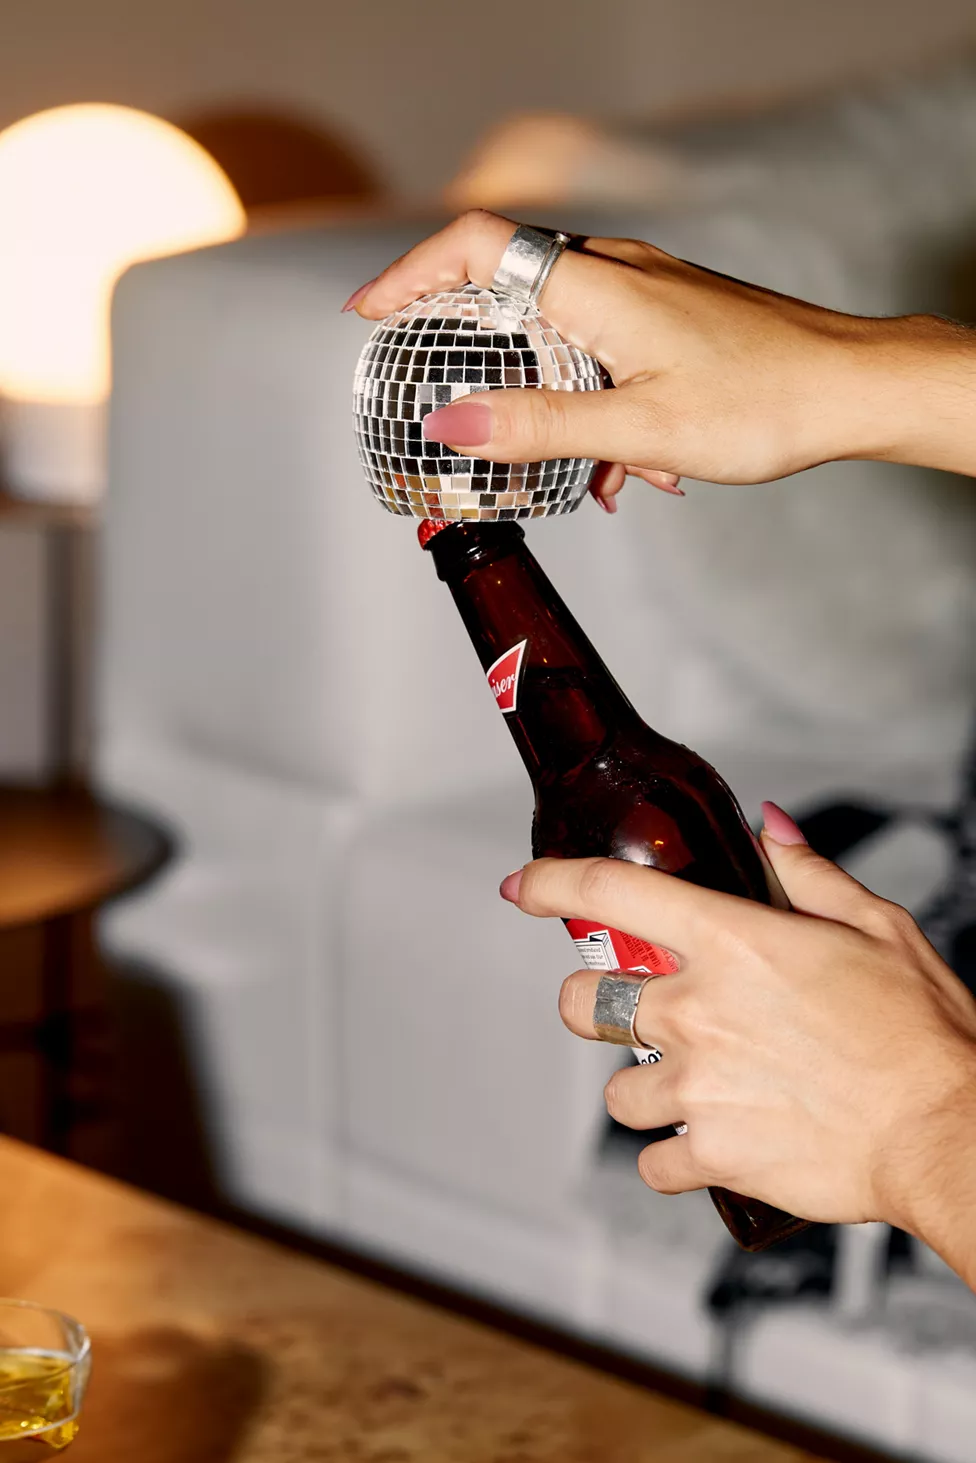 model opening a beer bottle with a small disco ball opener 